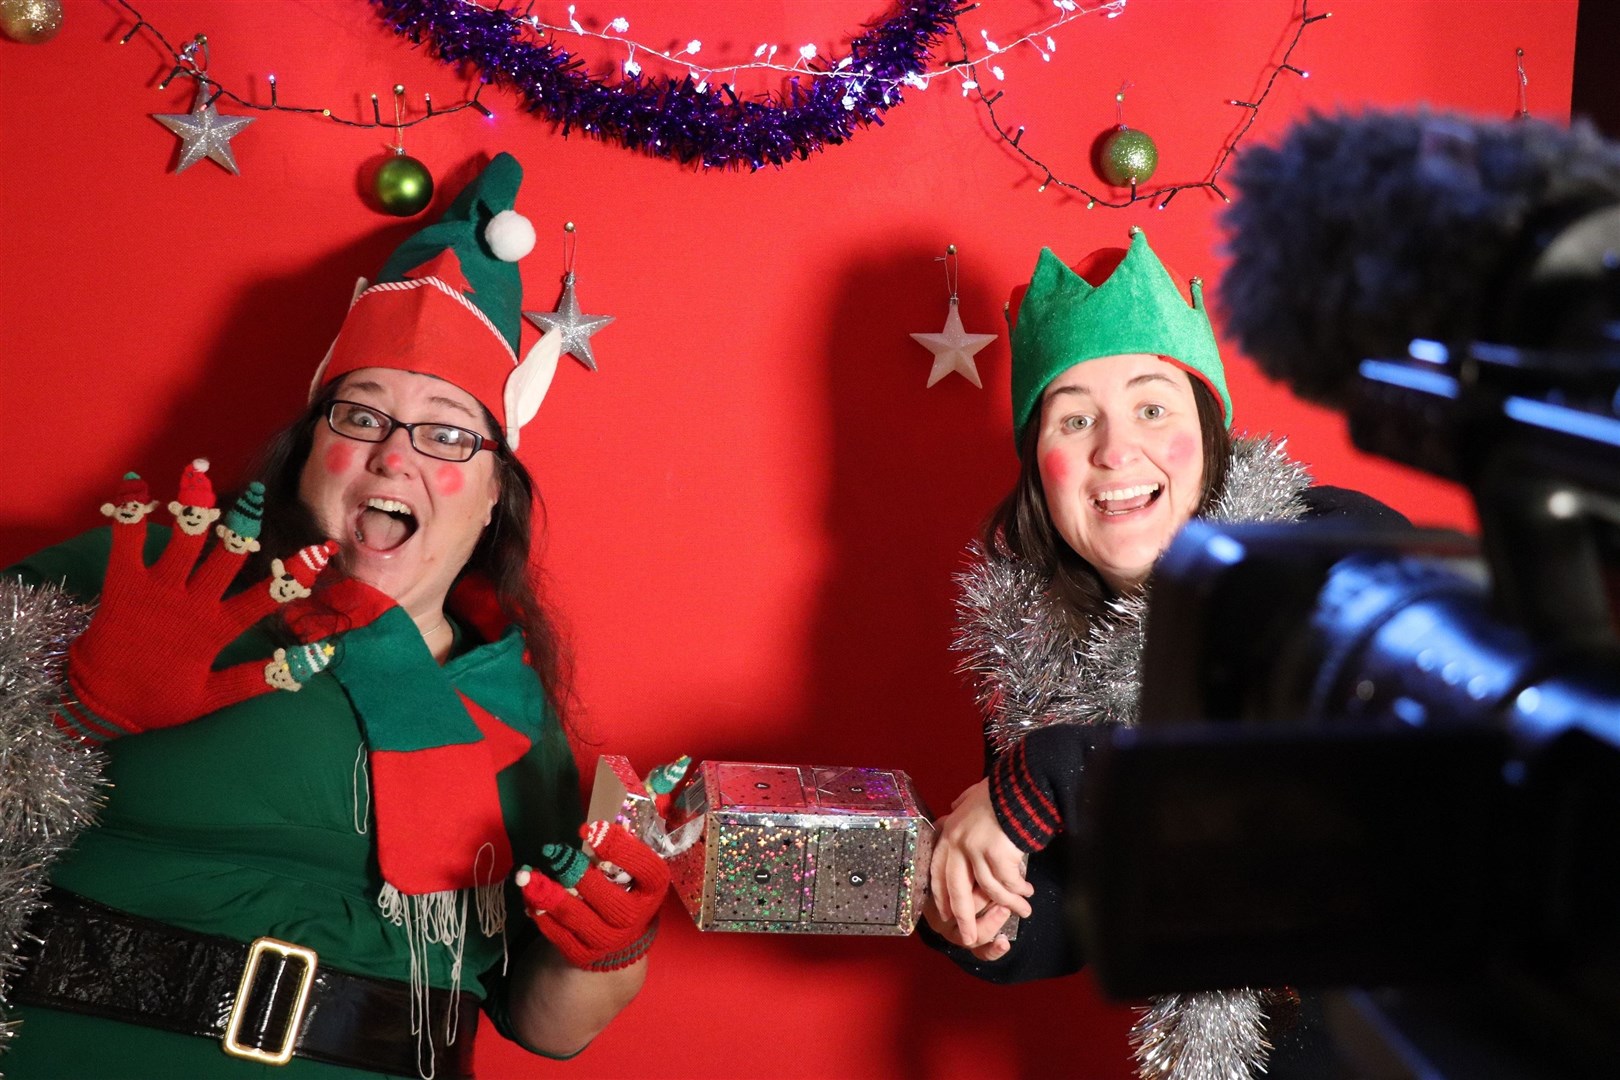 Eden Court has filmed a 'Christmas Crackers' video to engage with local schools.